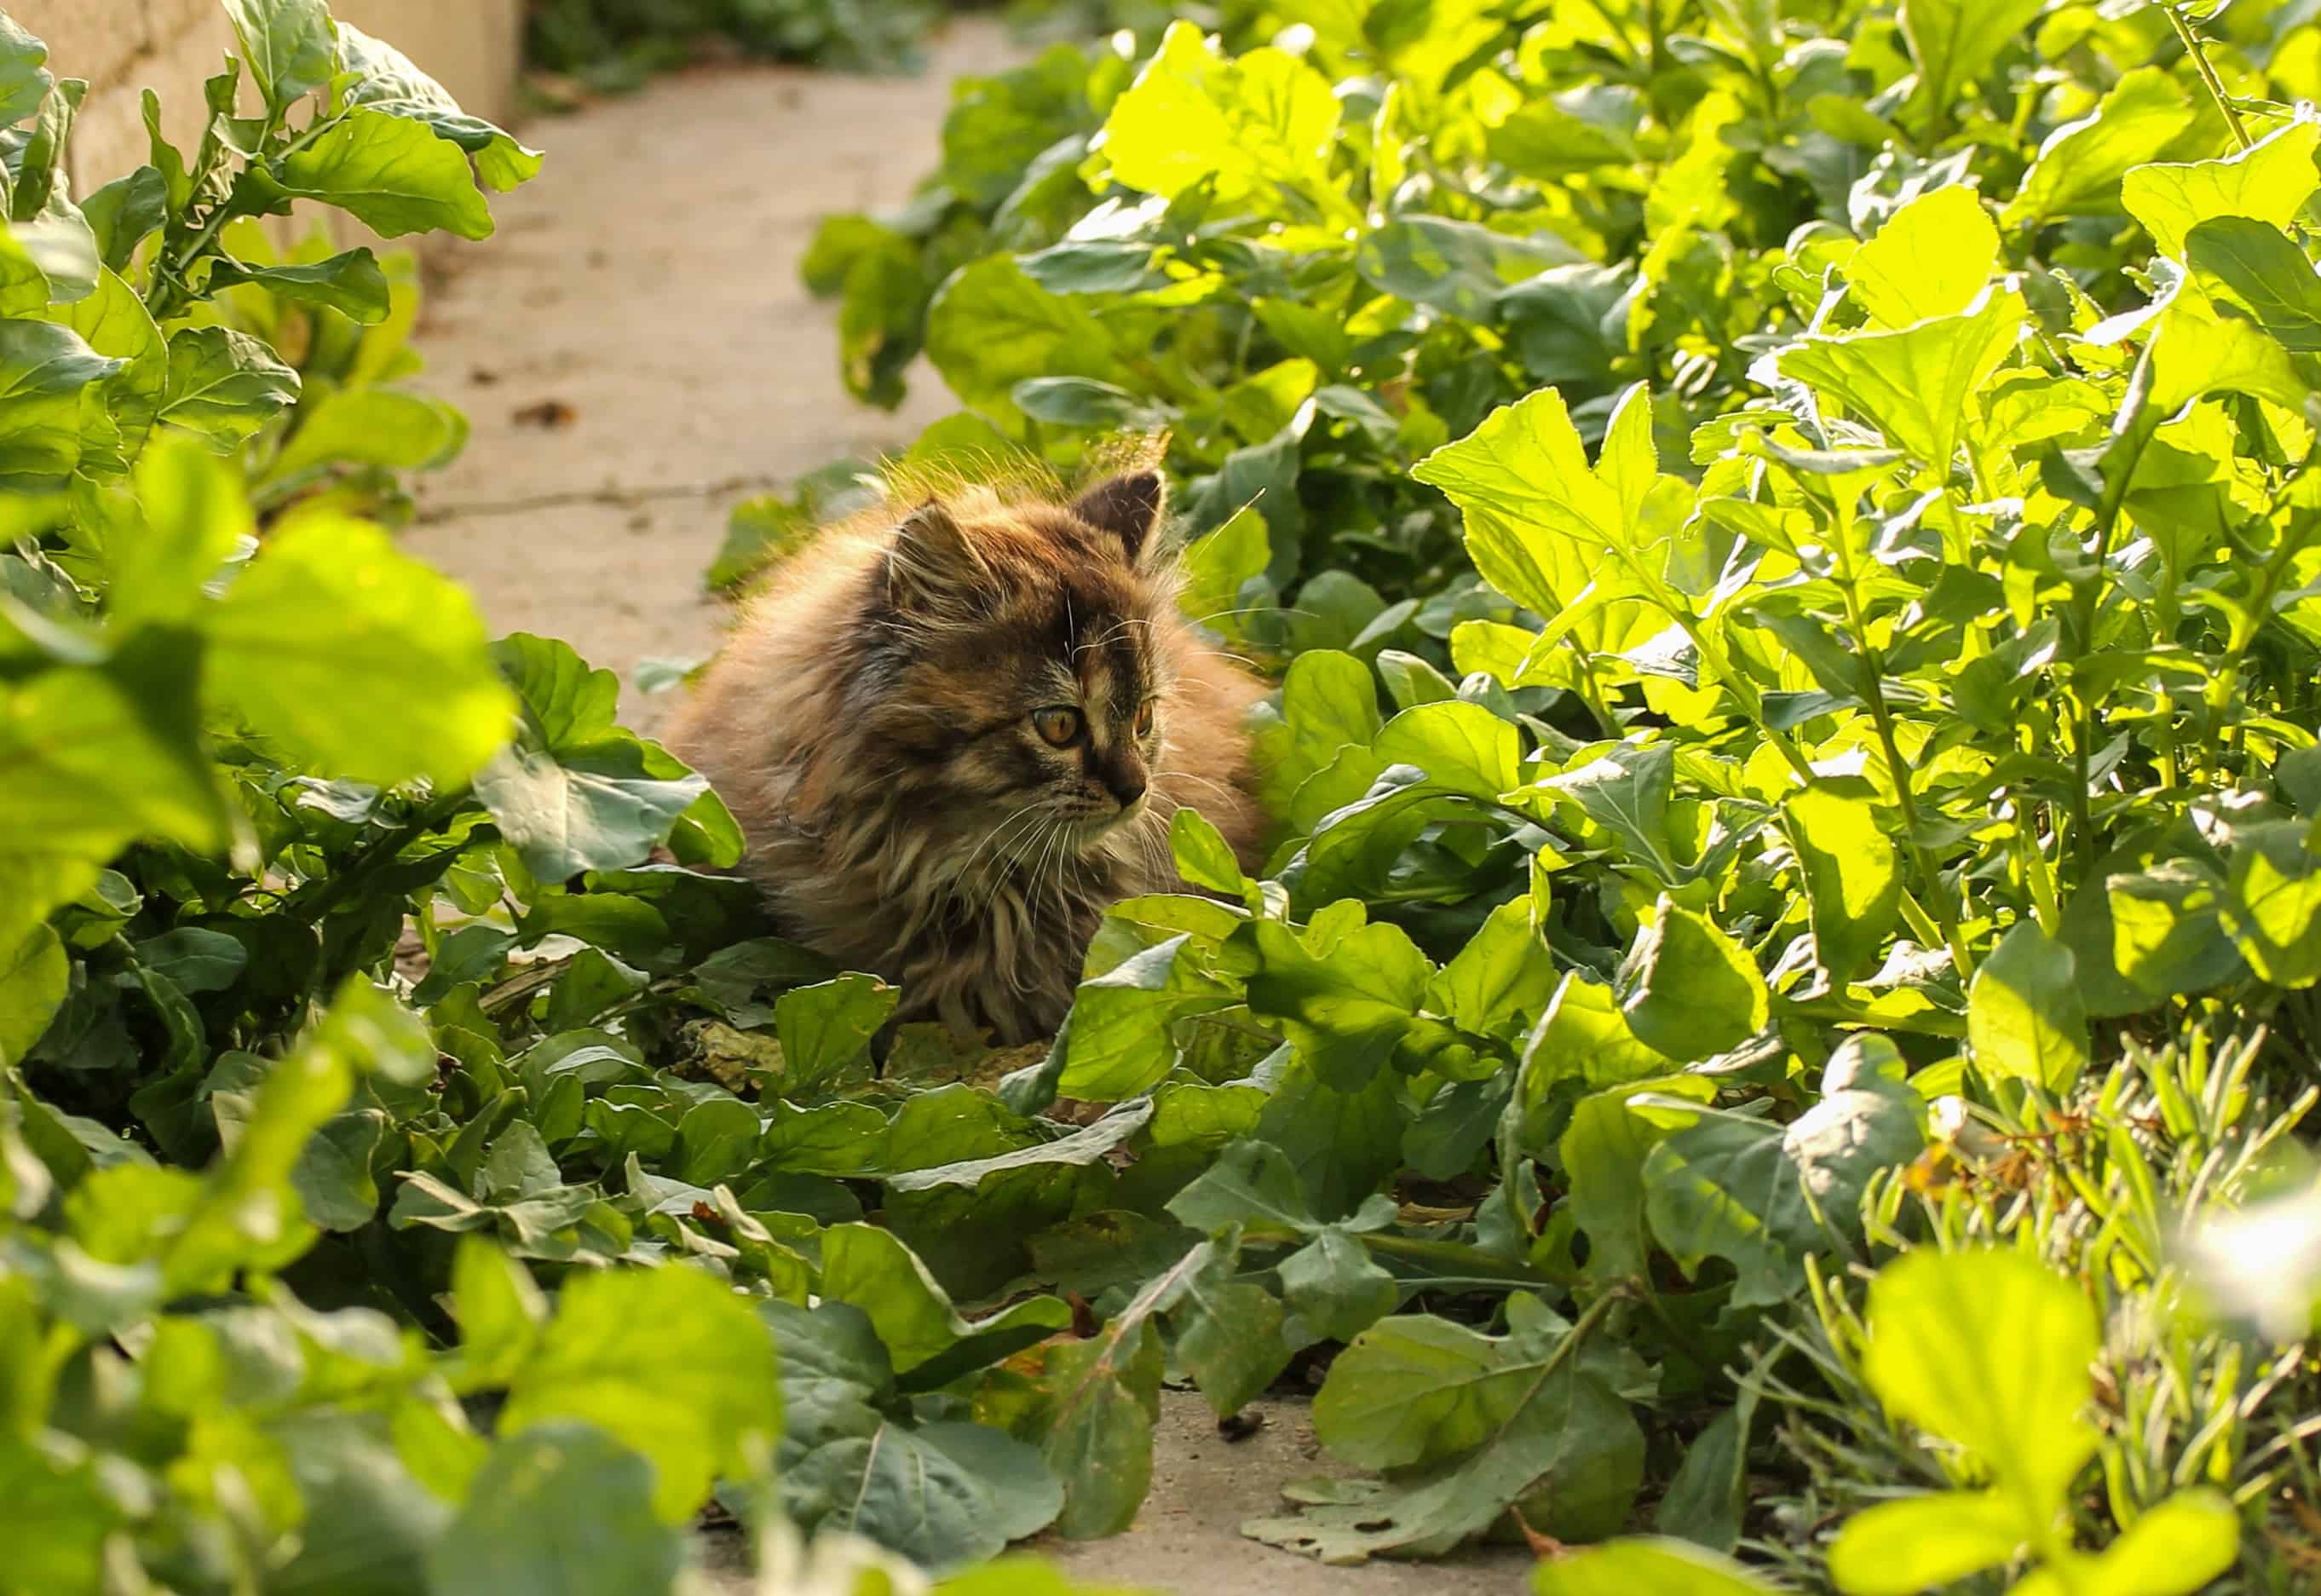 Free picture: nature, green leaf, tree, outdoor, cat, flora, daylight